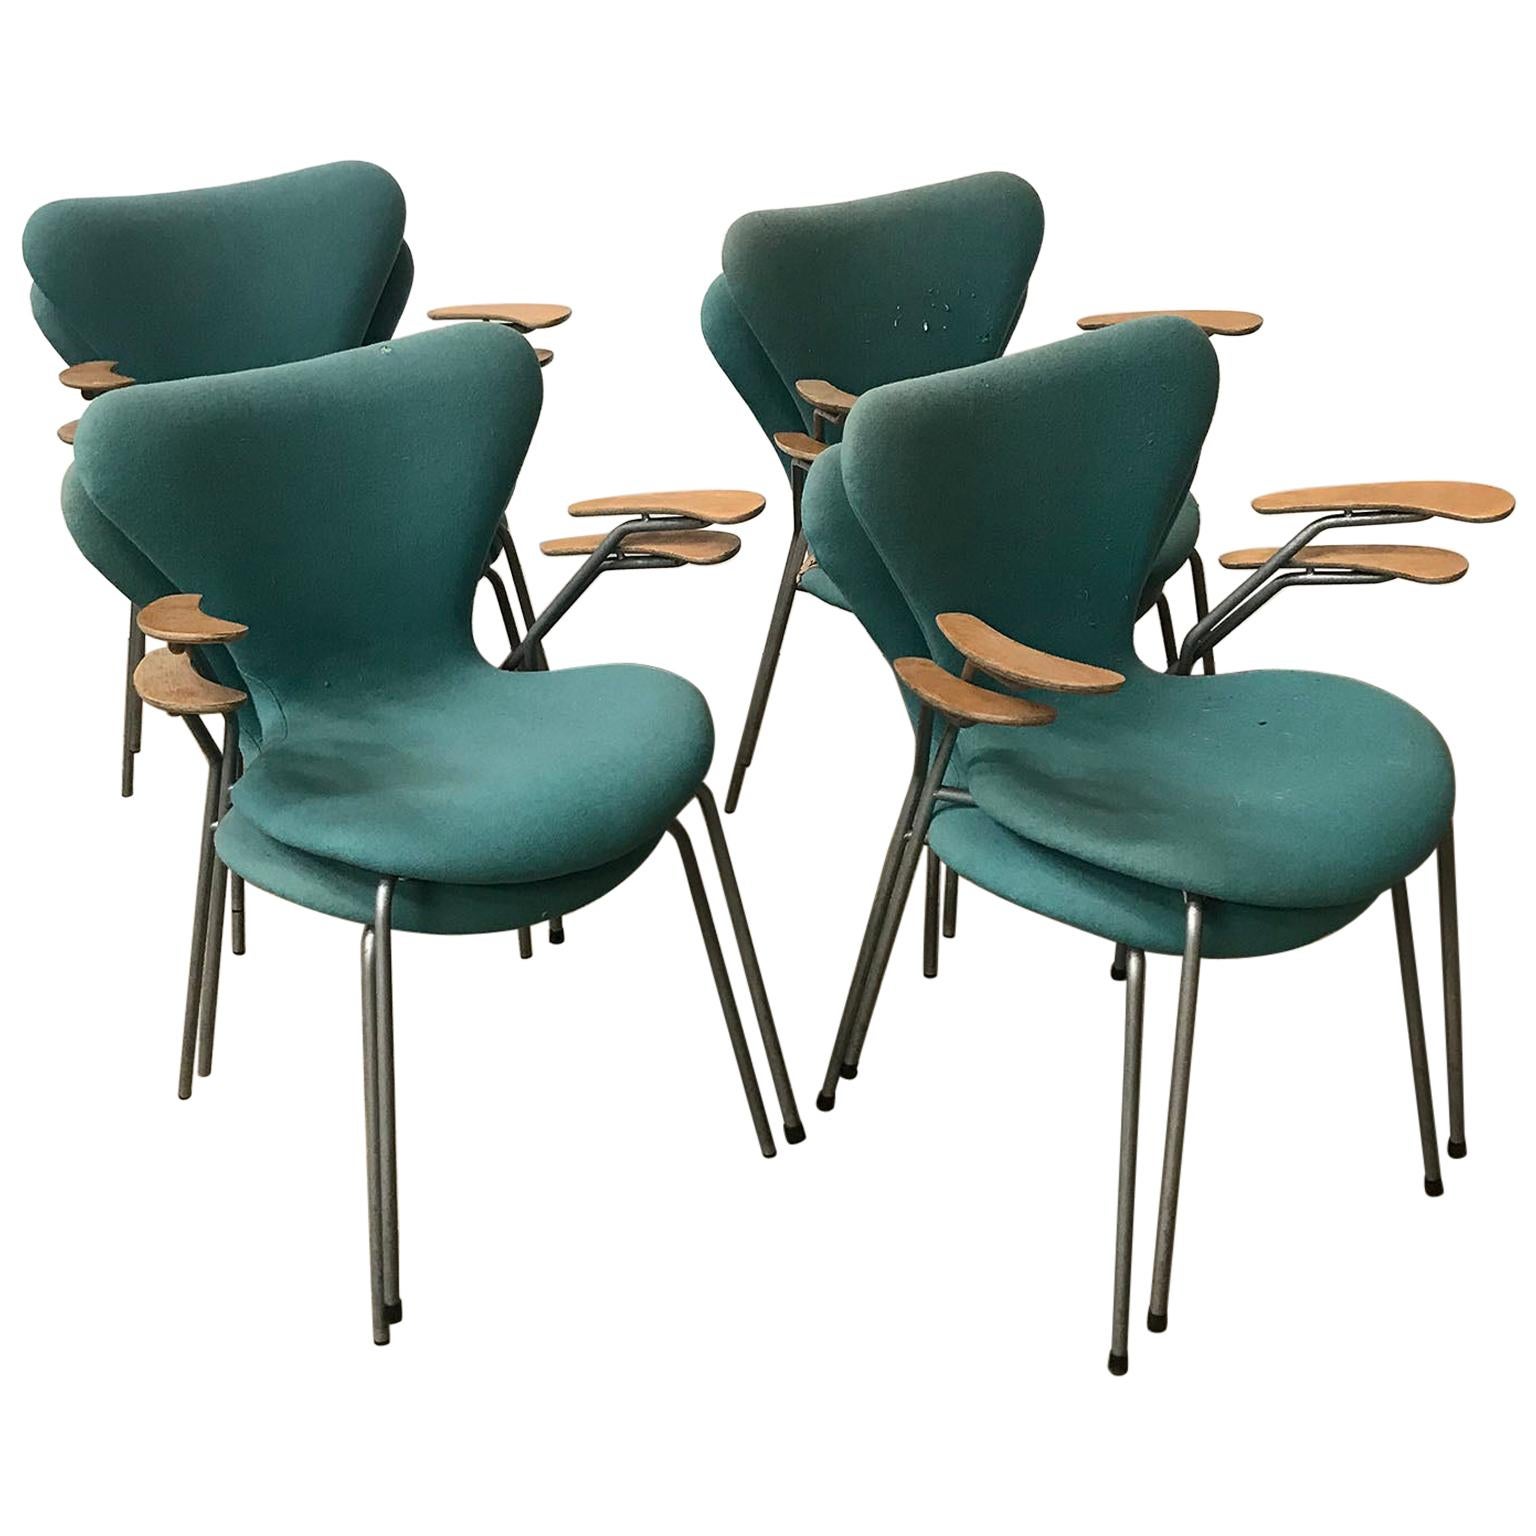 1955, Arne Jacobsen, Eight Turquoise to Upholster 3207 Butterfly Armchairs